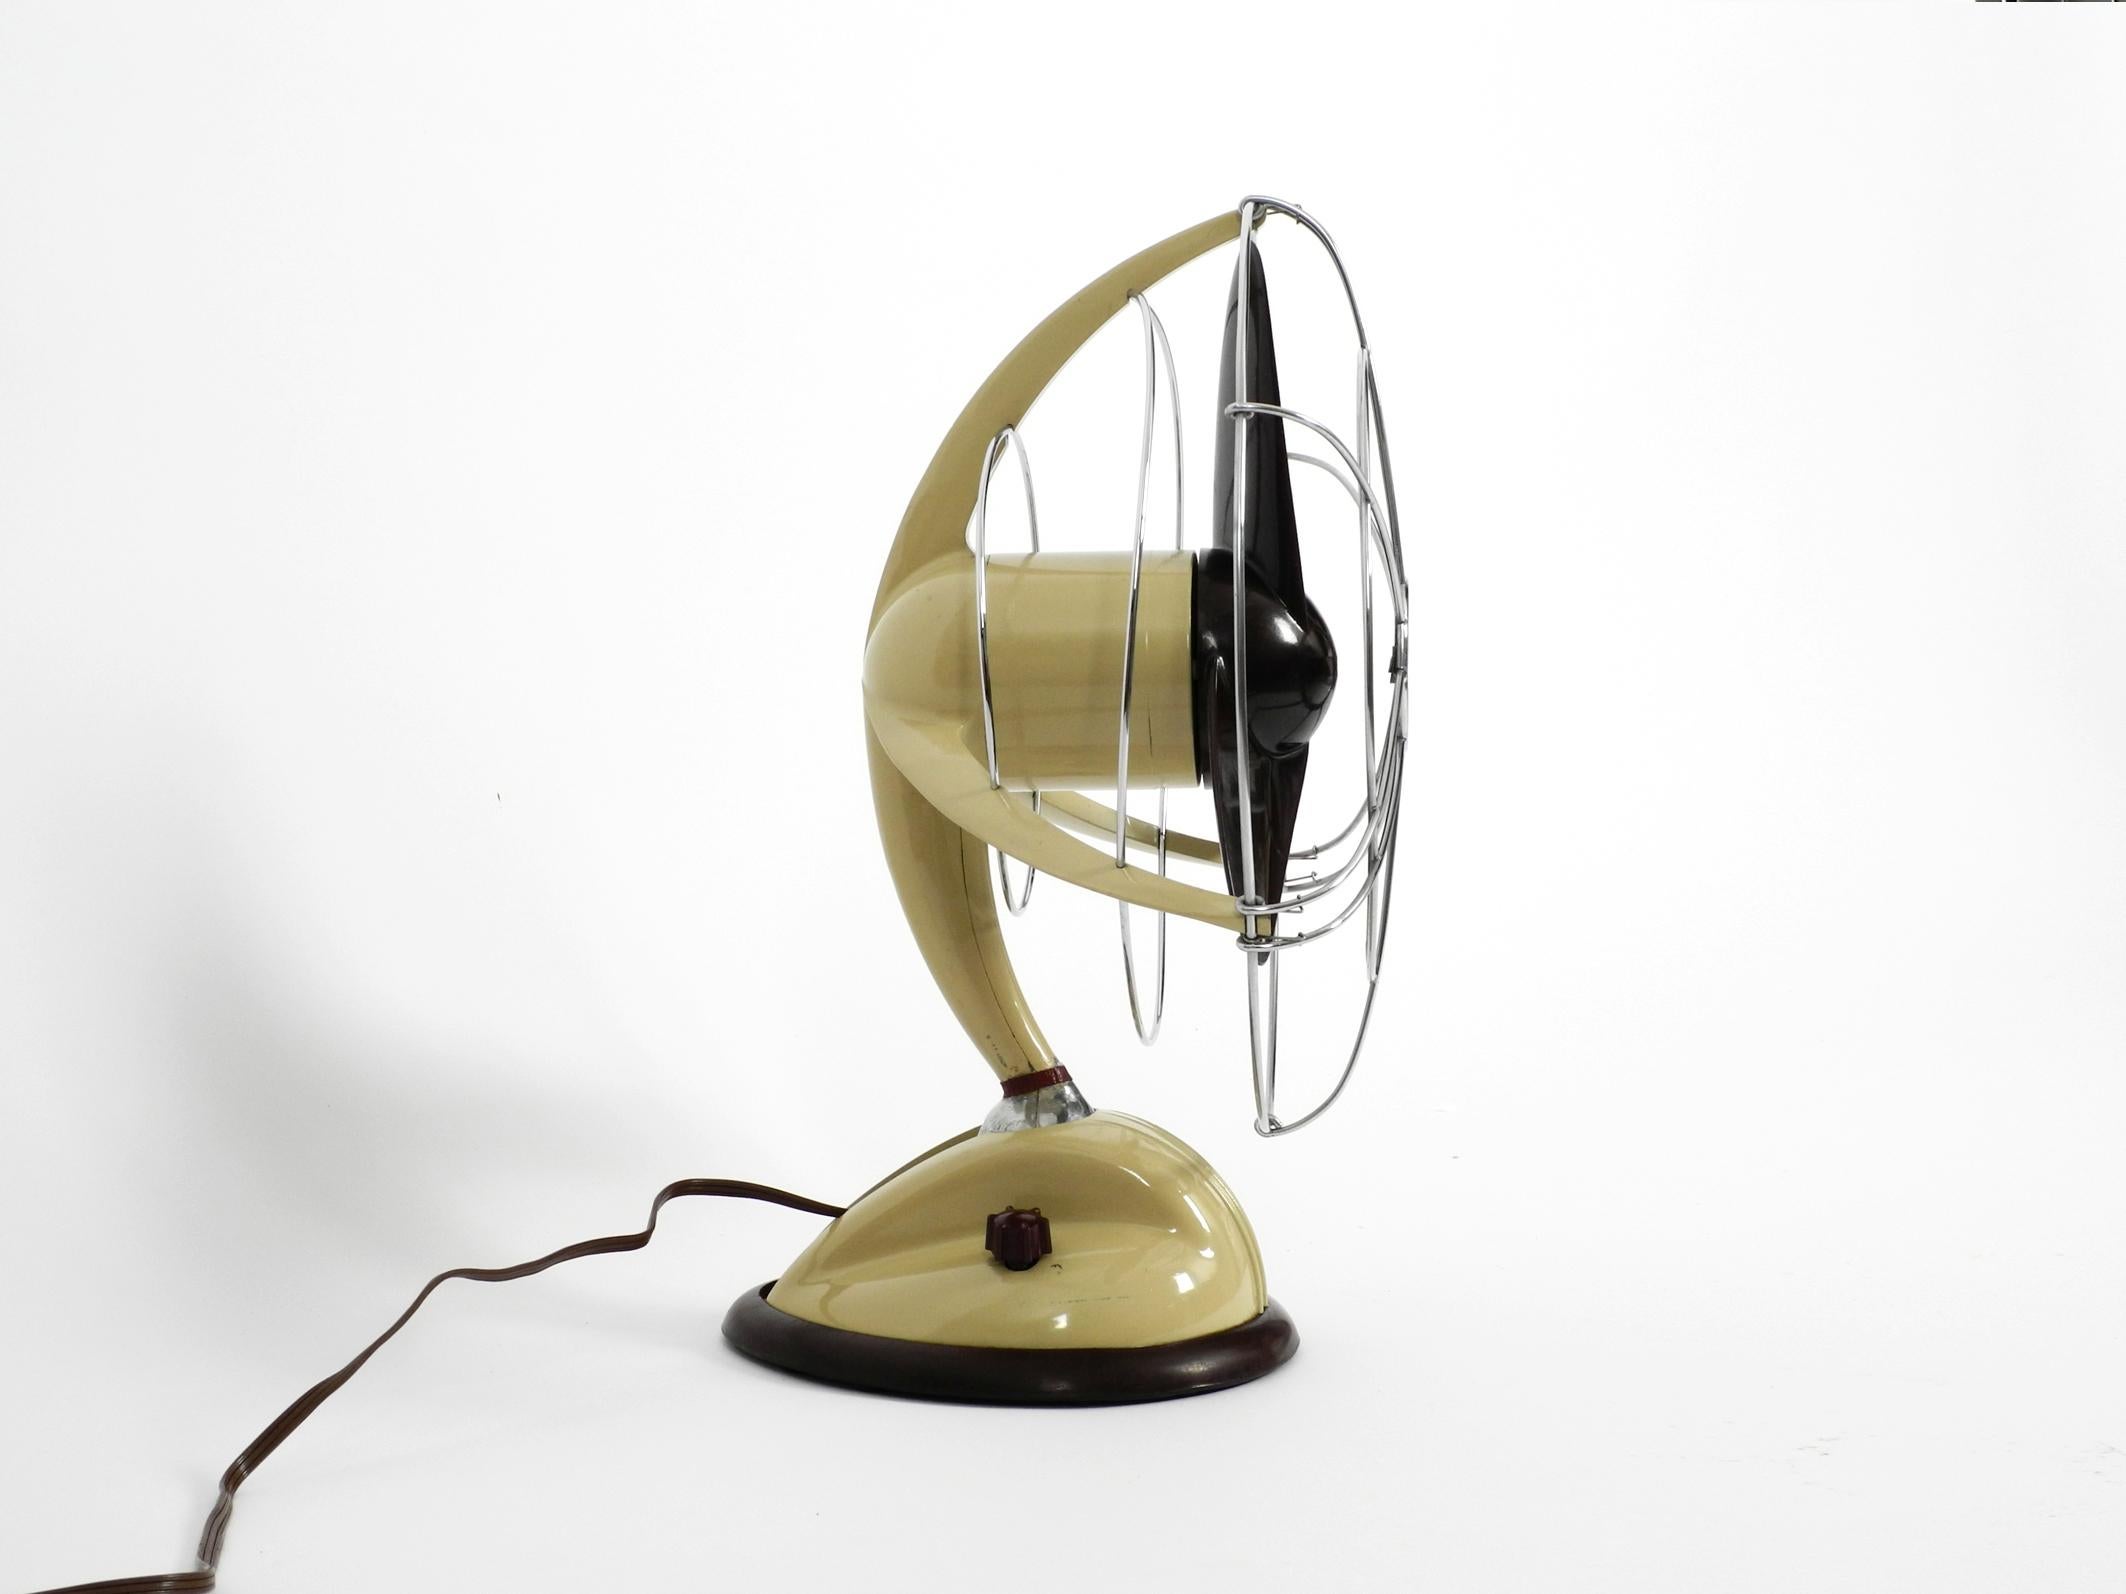 Beautiful original 1960s streamline table and wall fan by Marelli Mod. 304. Made in Italy.
Very good almost new condition. Stepless adjustable. Can be hung as a wall fan by lowering
the head all the way down. See photo no. 6. There is one knob to